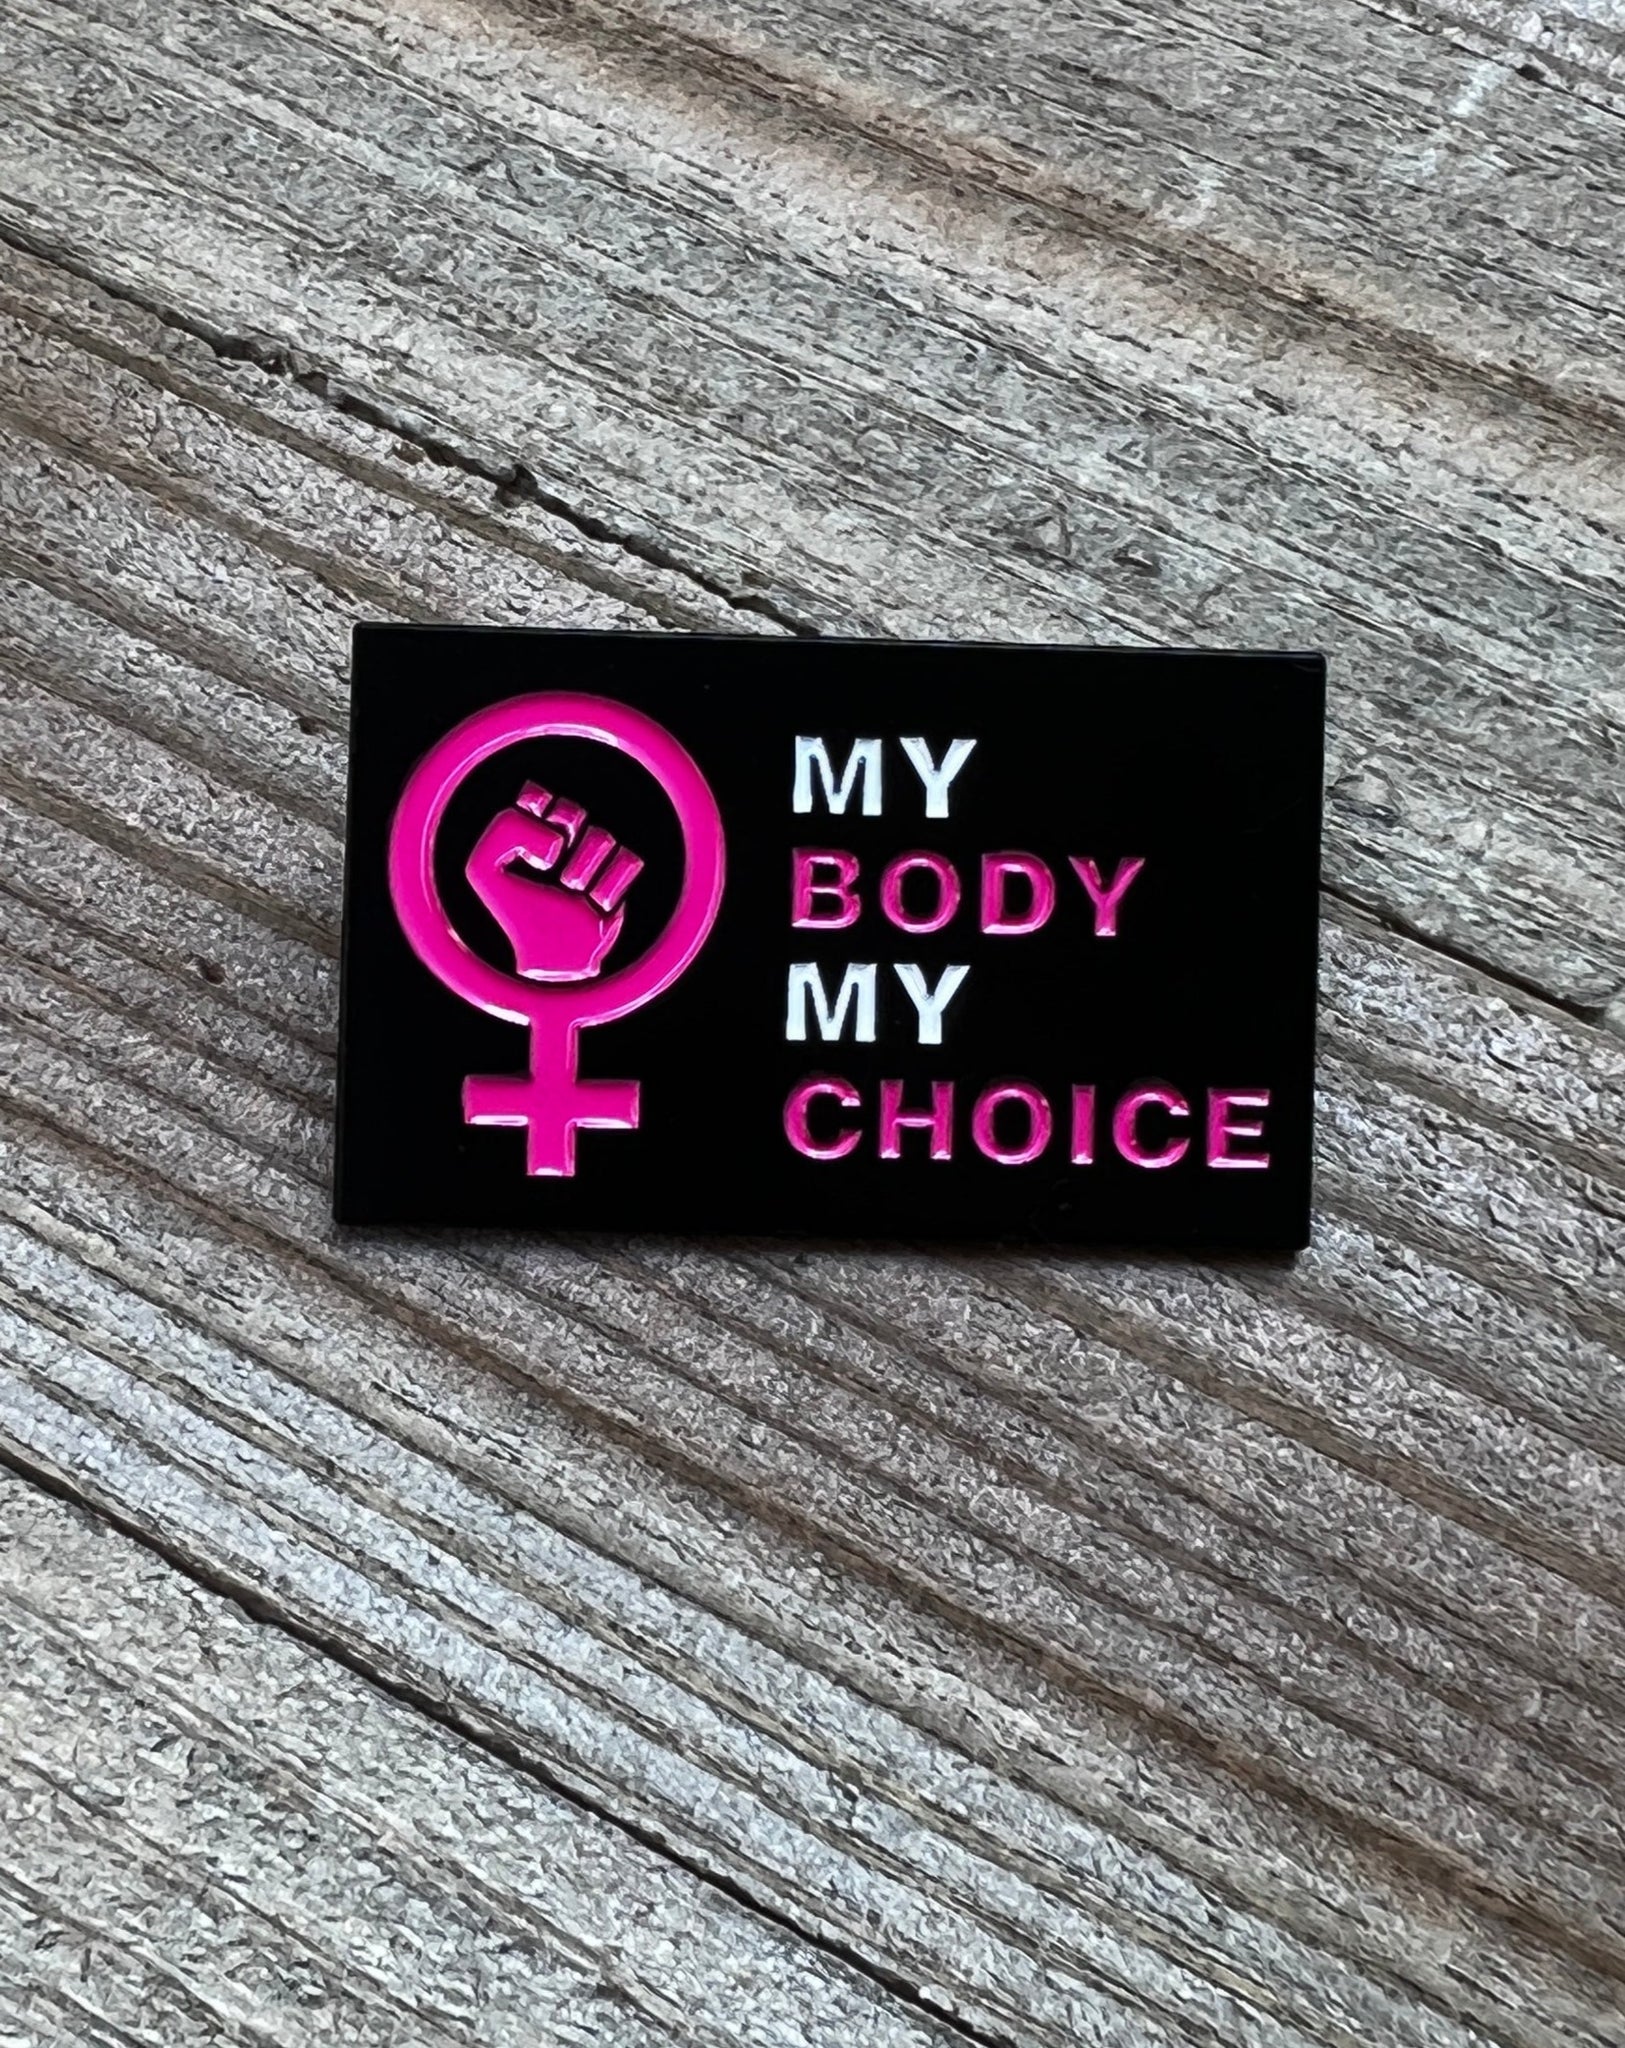 My Body My Choice Large Lapel Pin 1-1/2" x 1" - $1 for every pin sold will be donated to Planned Parenthood